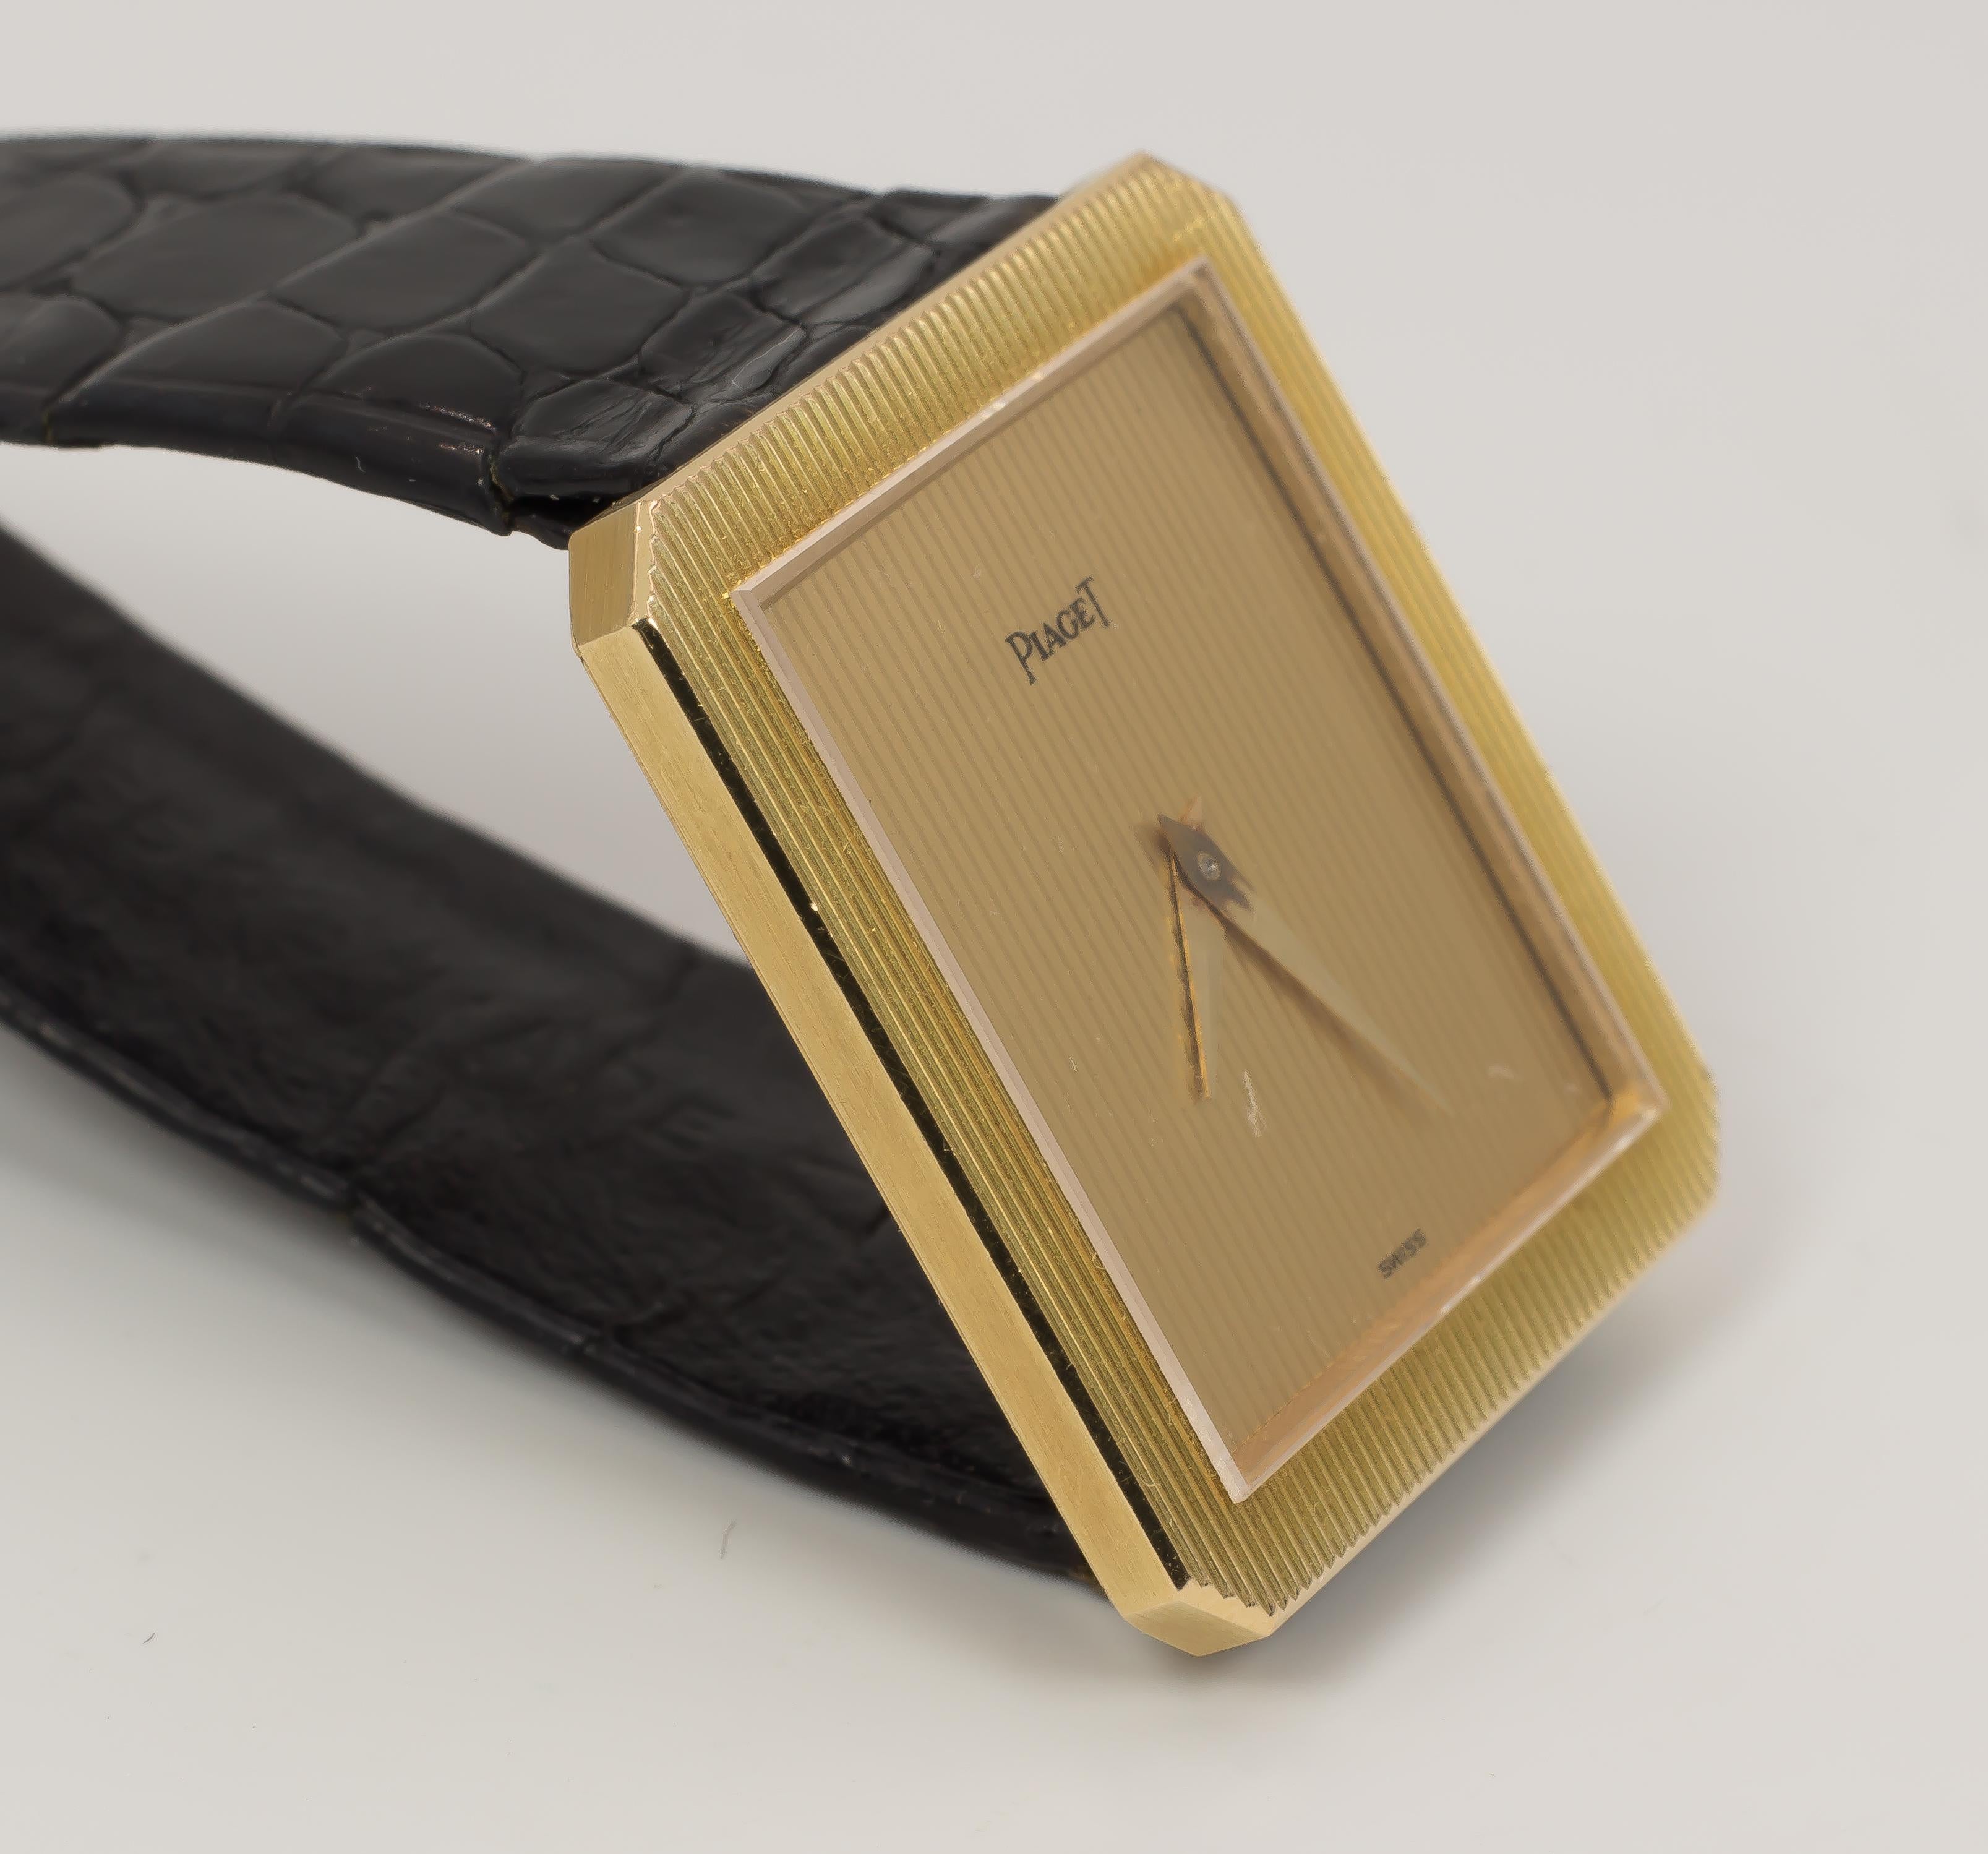 This vintage 18K gold Piaget wrist watch has a very nice and interesting square shape and dates from the 1980s. 
The watch comes with its original box and with its original certificate. 

Reference: 9154

BRAND
Piaget

MATERIALS
18K